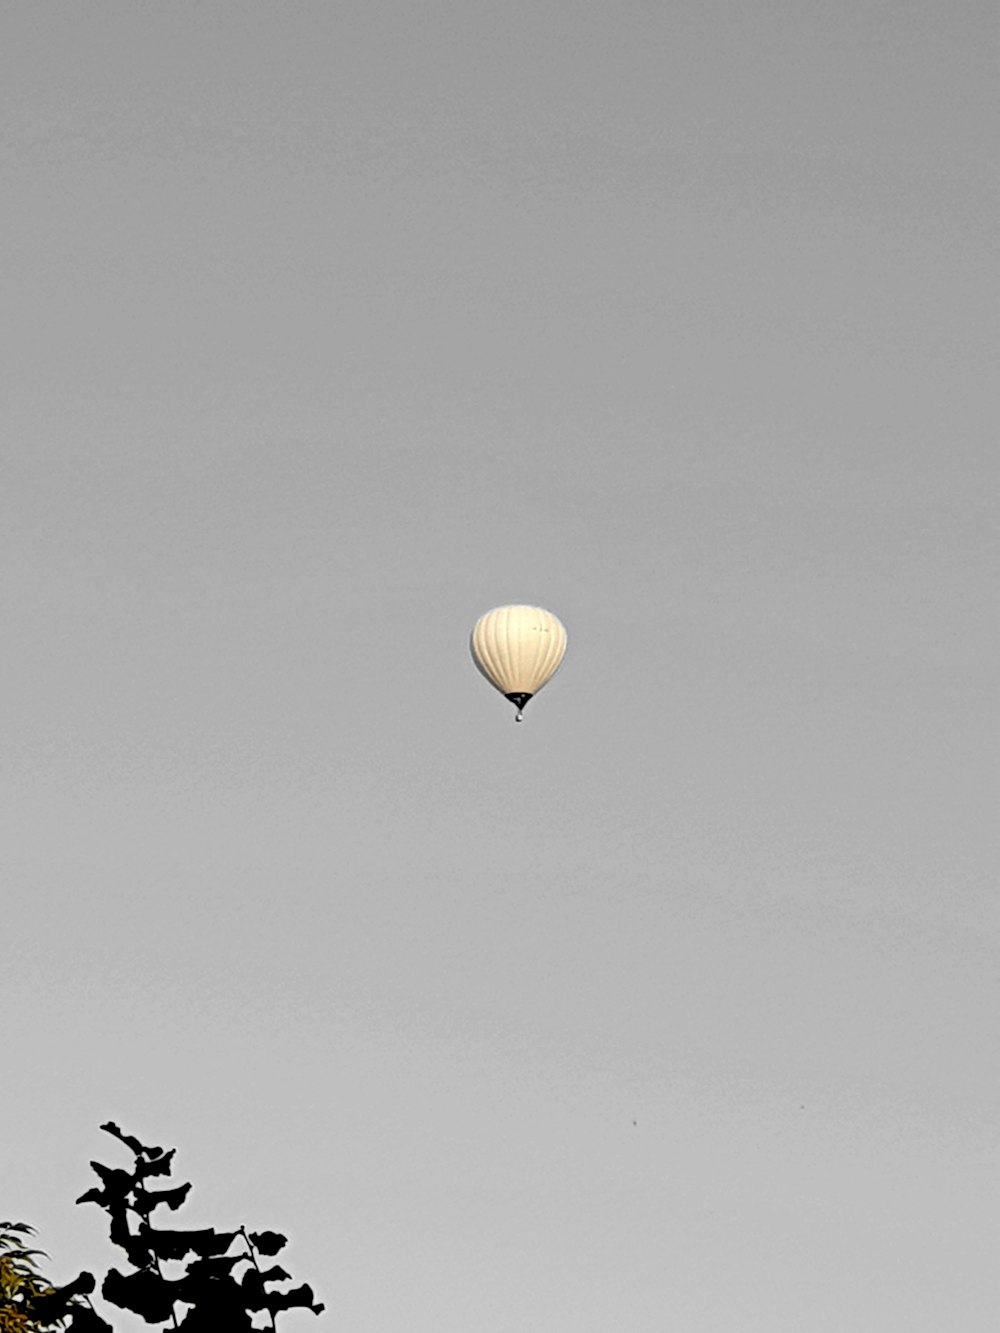 yellow hot air balloon floating on sky